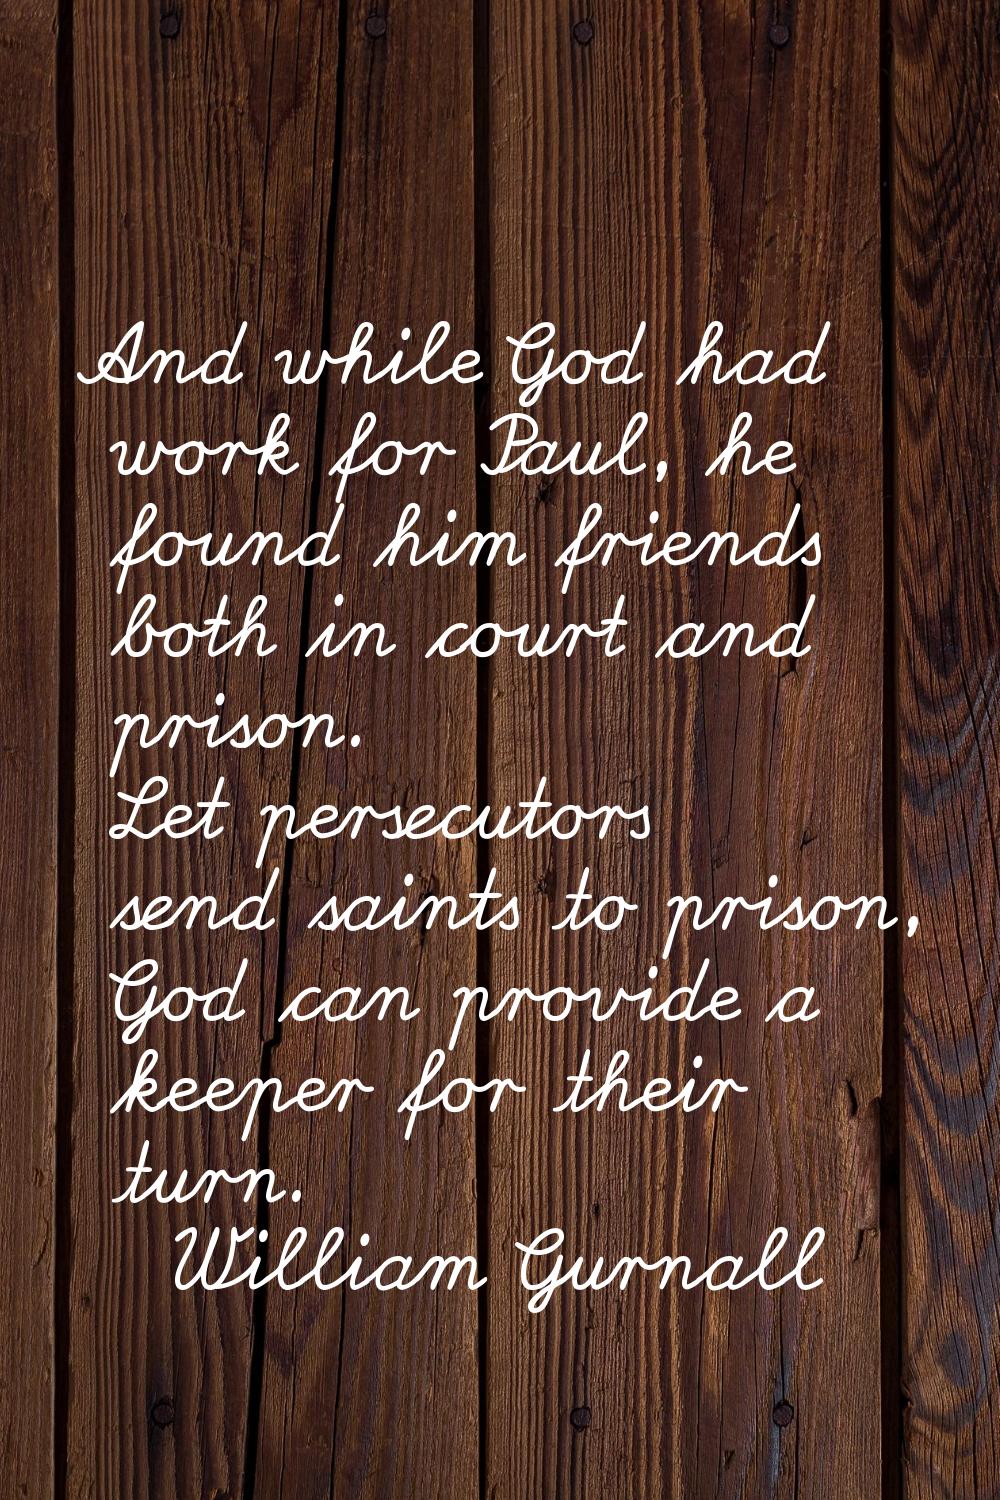 And while God had work for Paul, he found him friends both in court and prison. Let persecutors sen